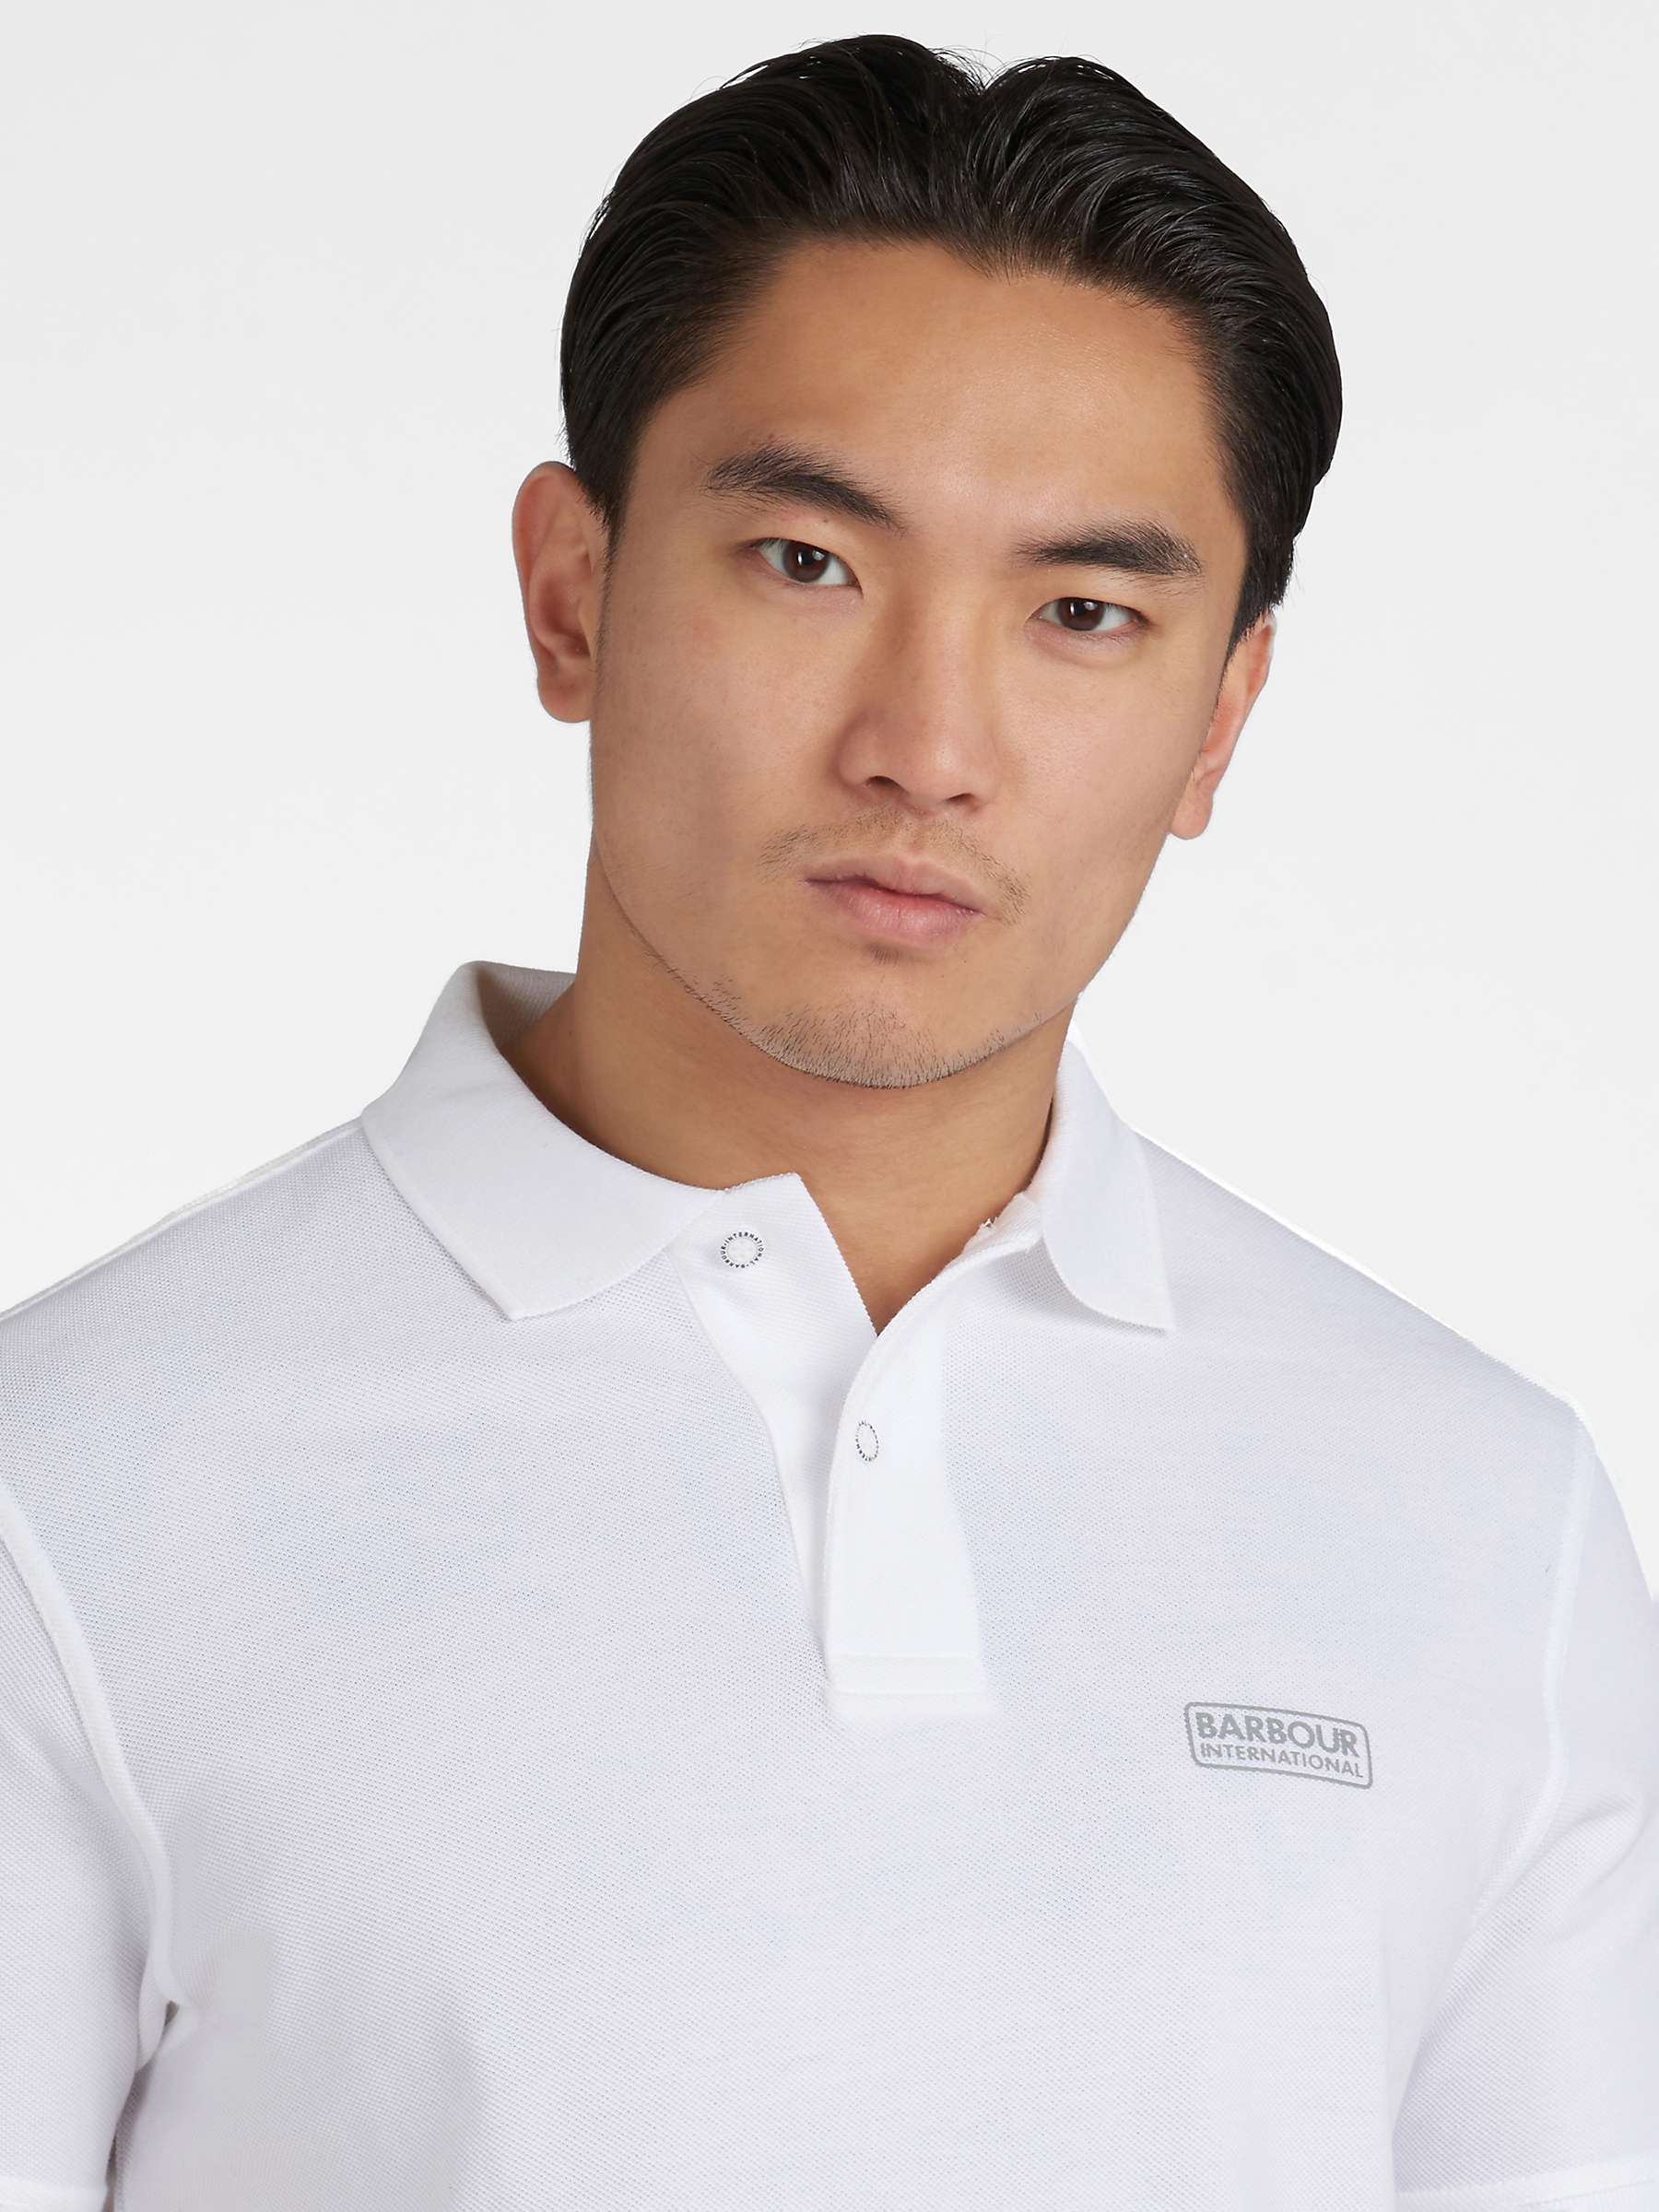 Buy Barbour International Polo Shirt, White Online at johnlewis.com